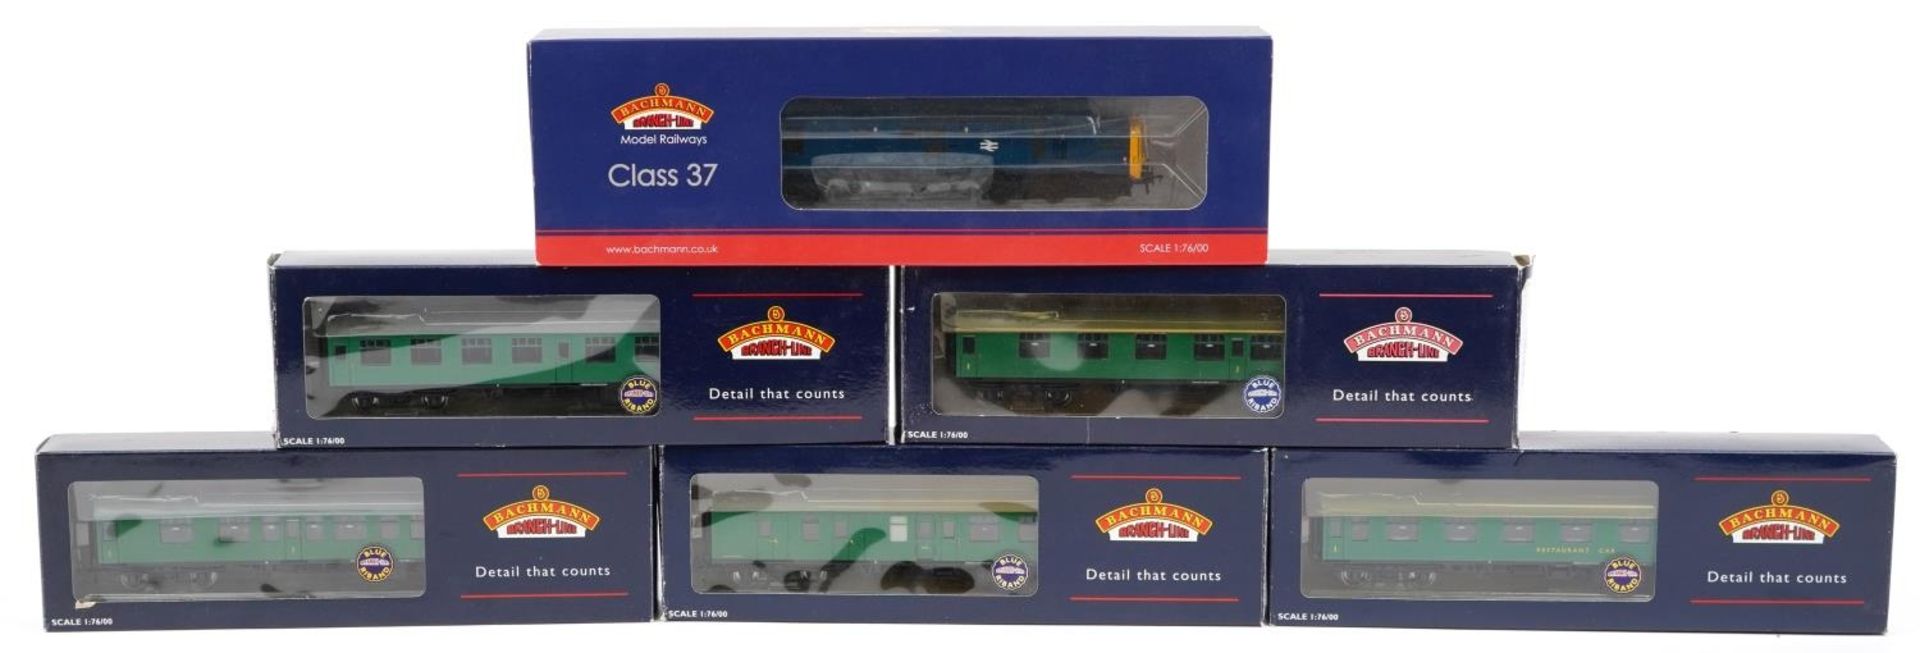 Bachmann Branch-Line OO gauge model railway with boxes comprising Class 37/O diesel locomotive and